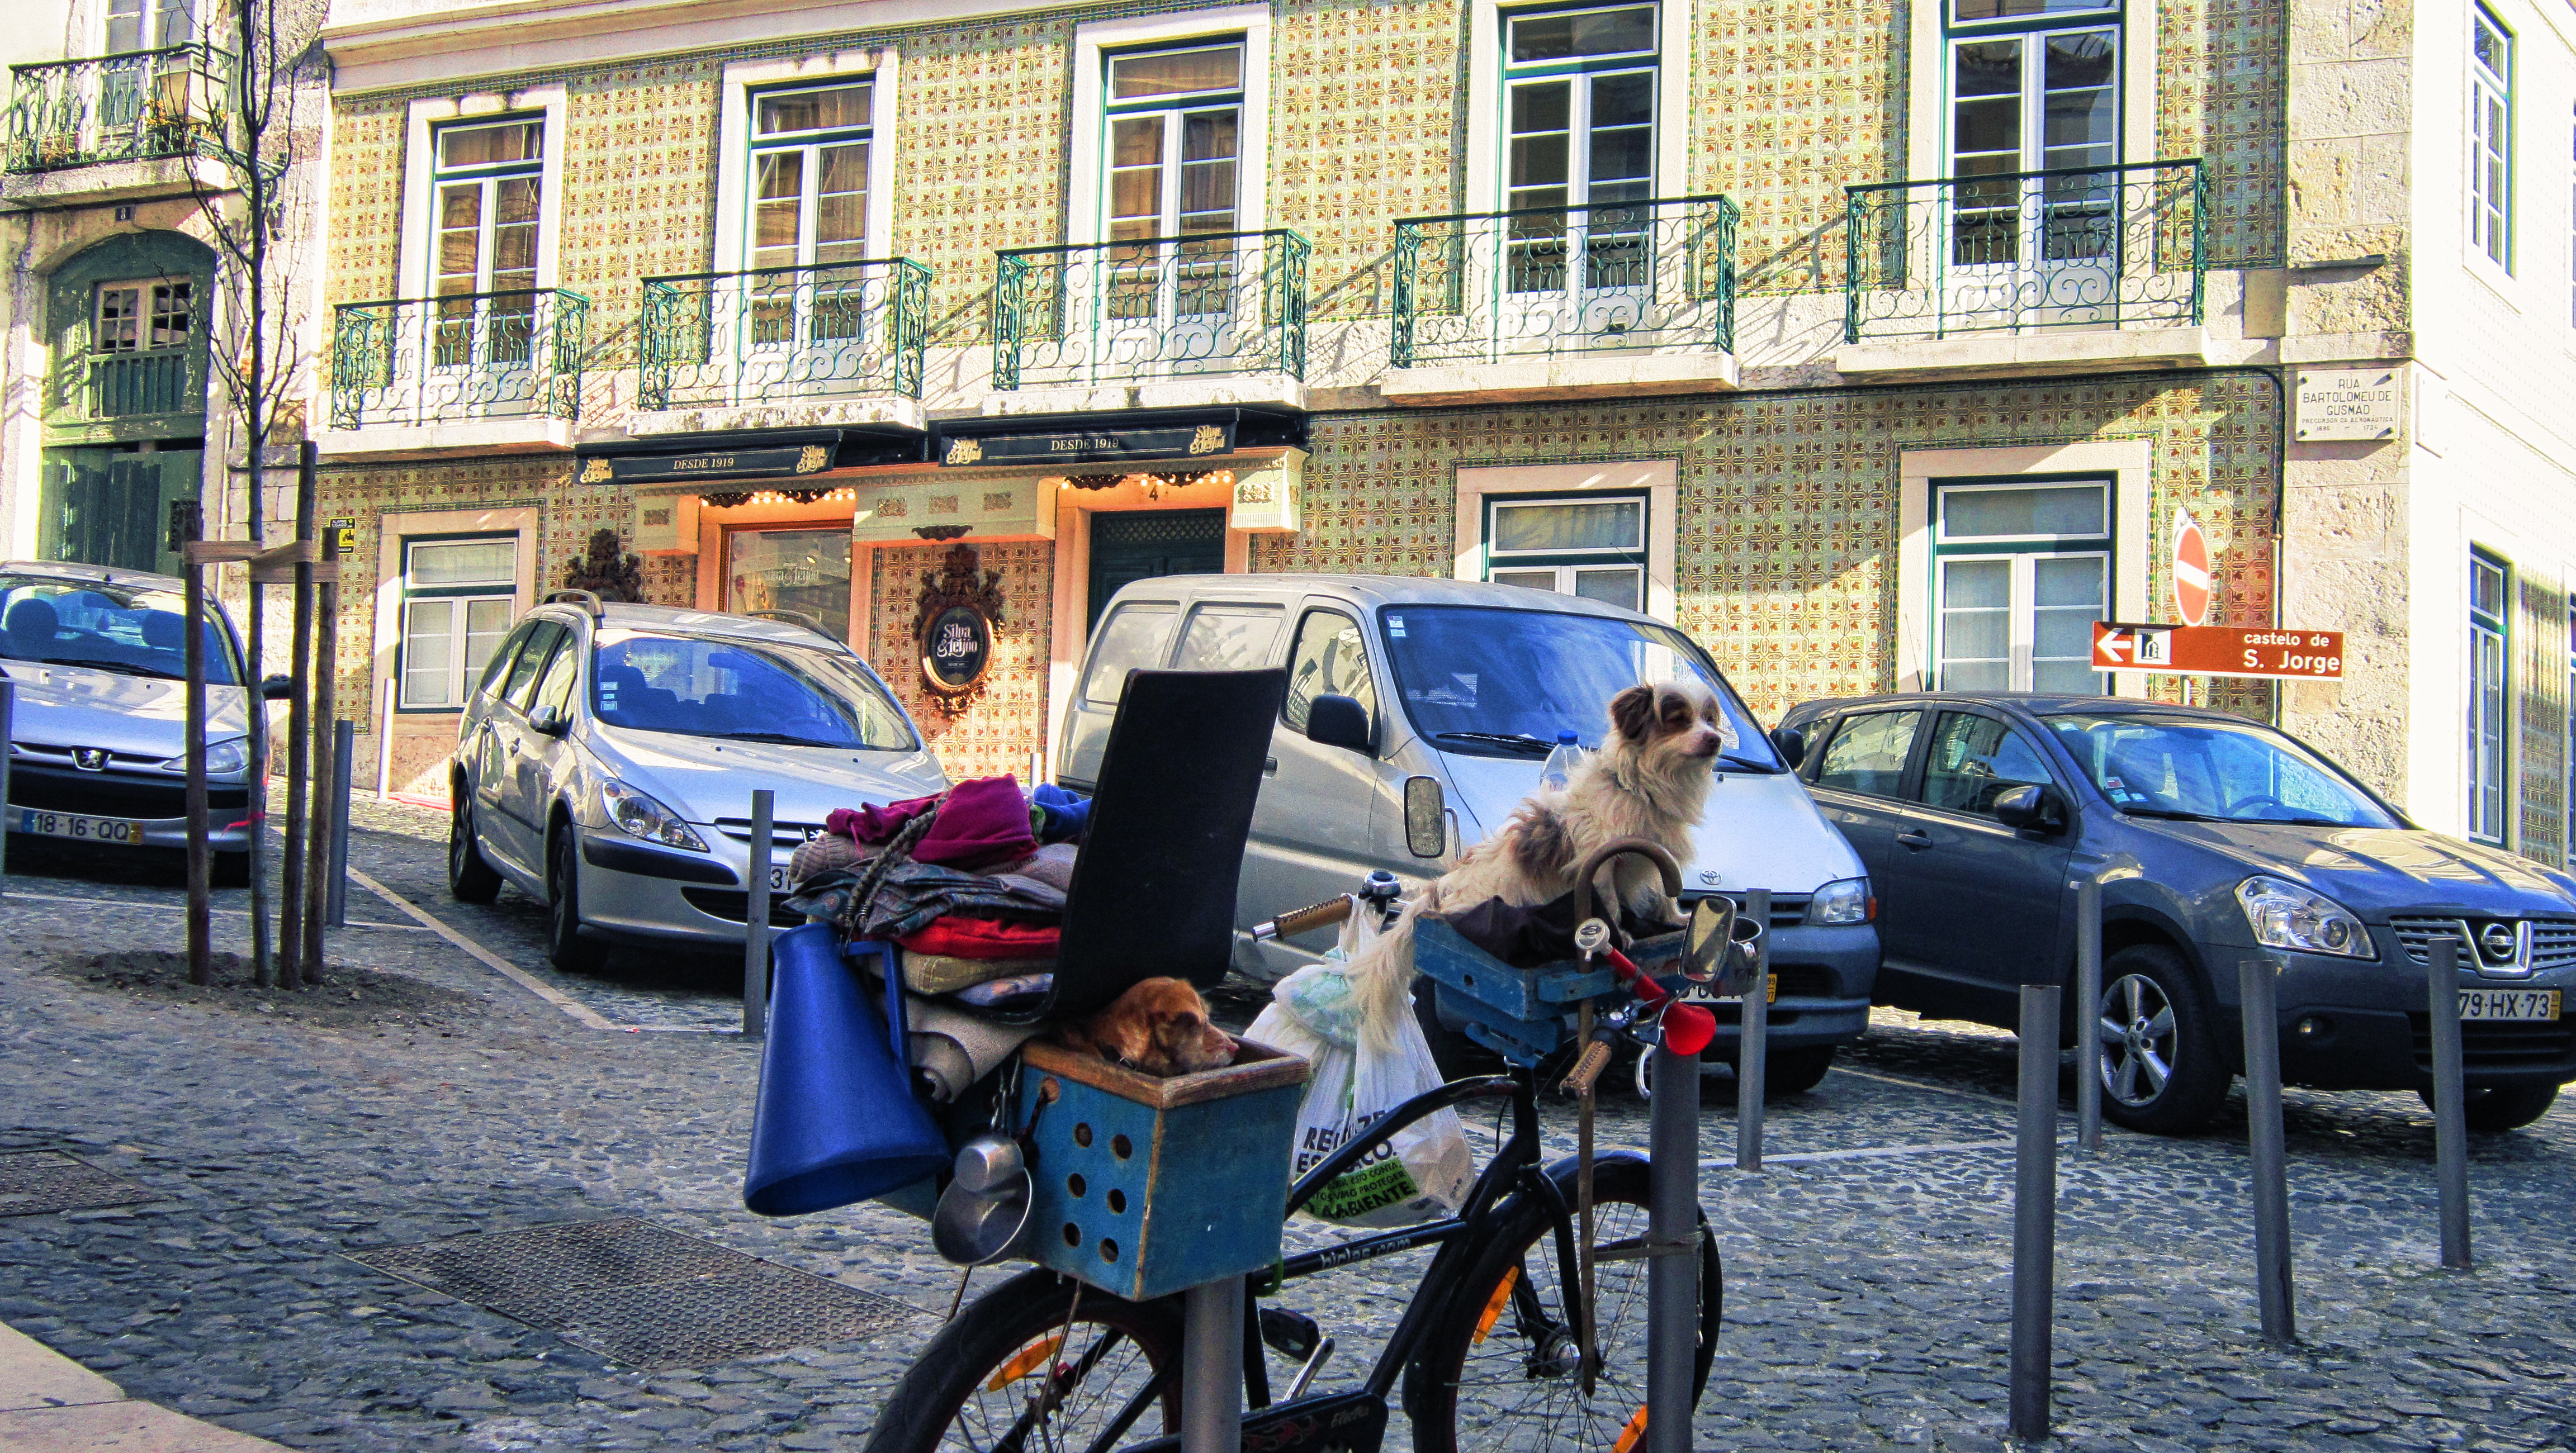 A street image from the Lisbon city